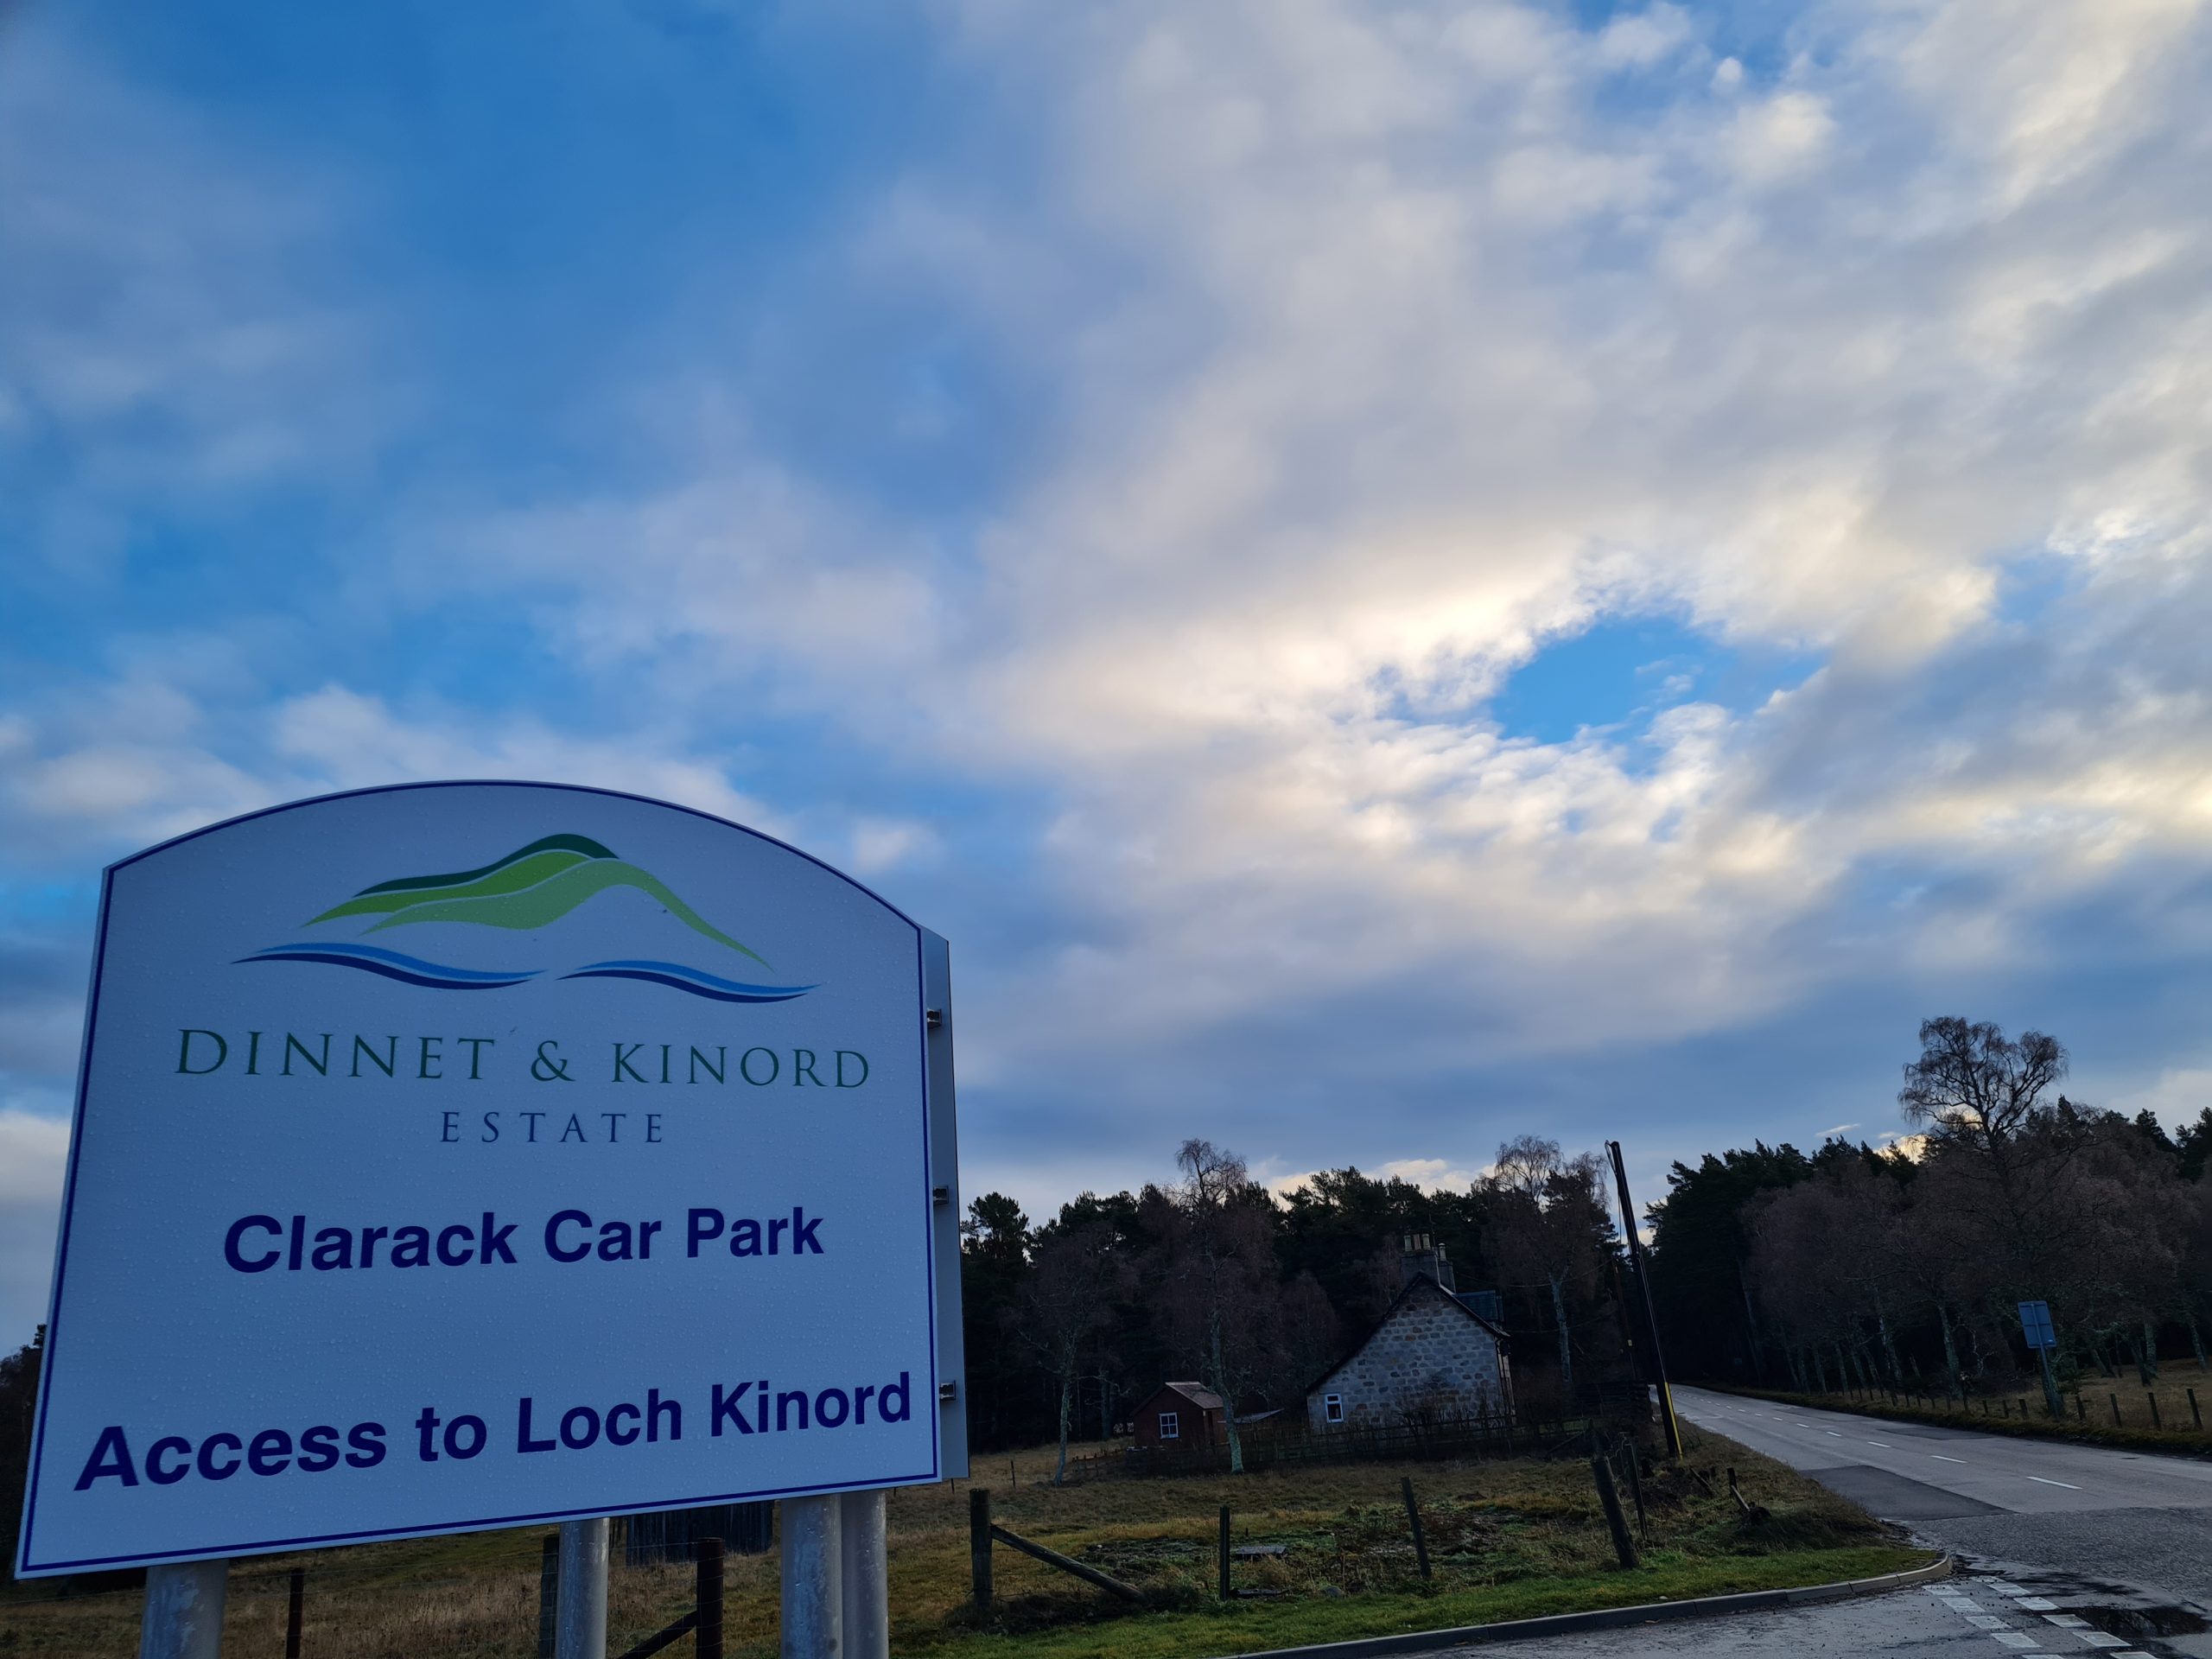 Clarack Car Park on the Dinnet Estate for the Loch of Kinord walks in The Muir of Dinnet Nature reserve near to Cairngorm Lodges